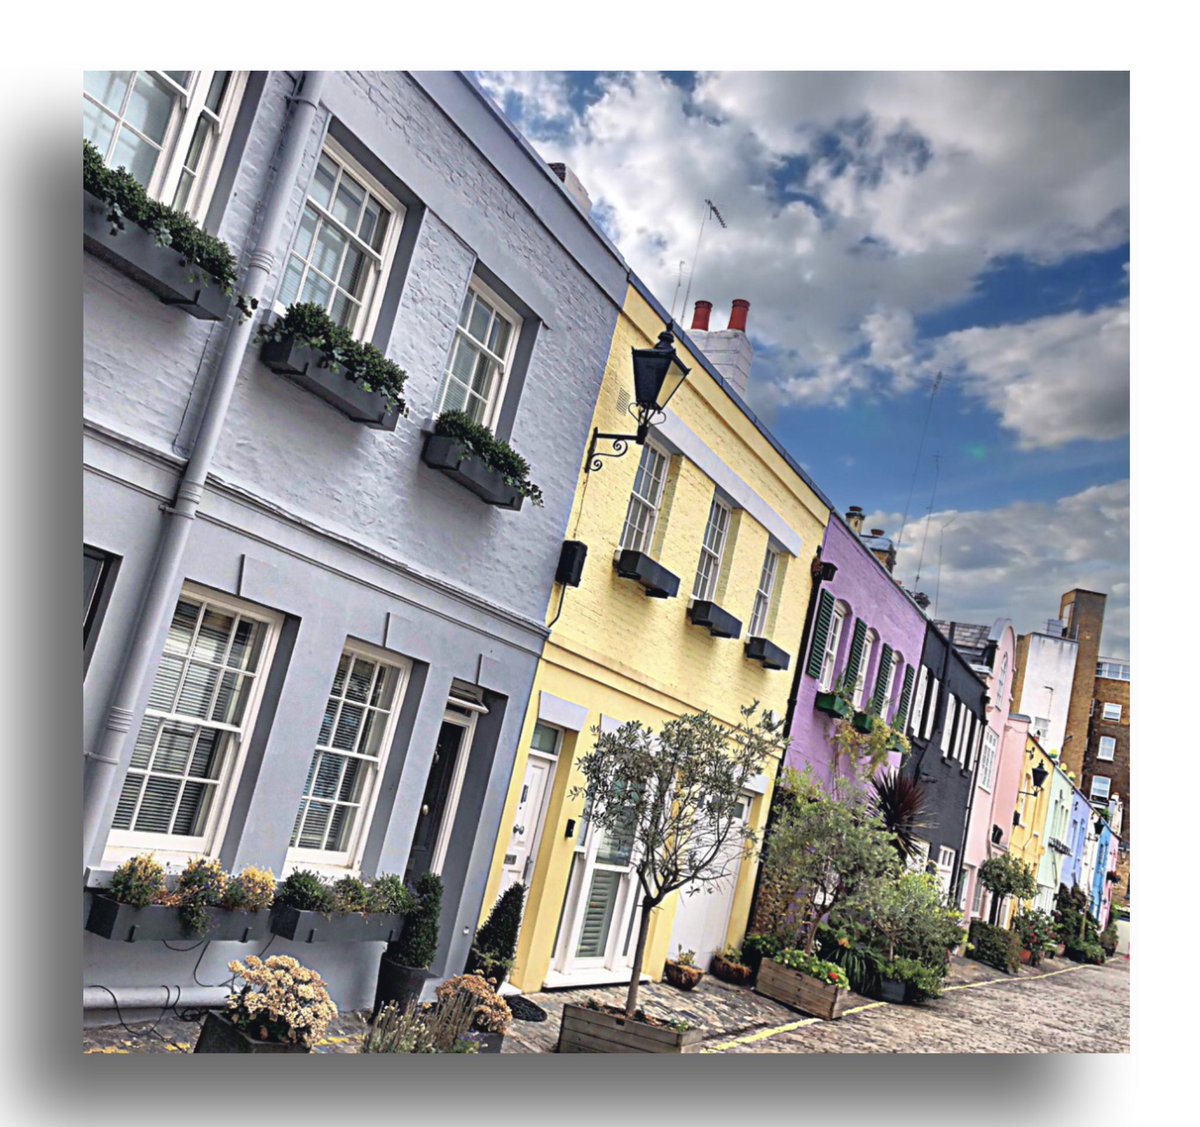 Multicoloured Mews Westminster #london #paddington #westminster #housesofinstagram #colouredhouses #architecture #architecuralphotography #photography #estageagents #realestate